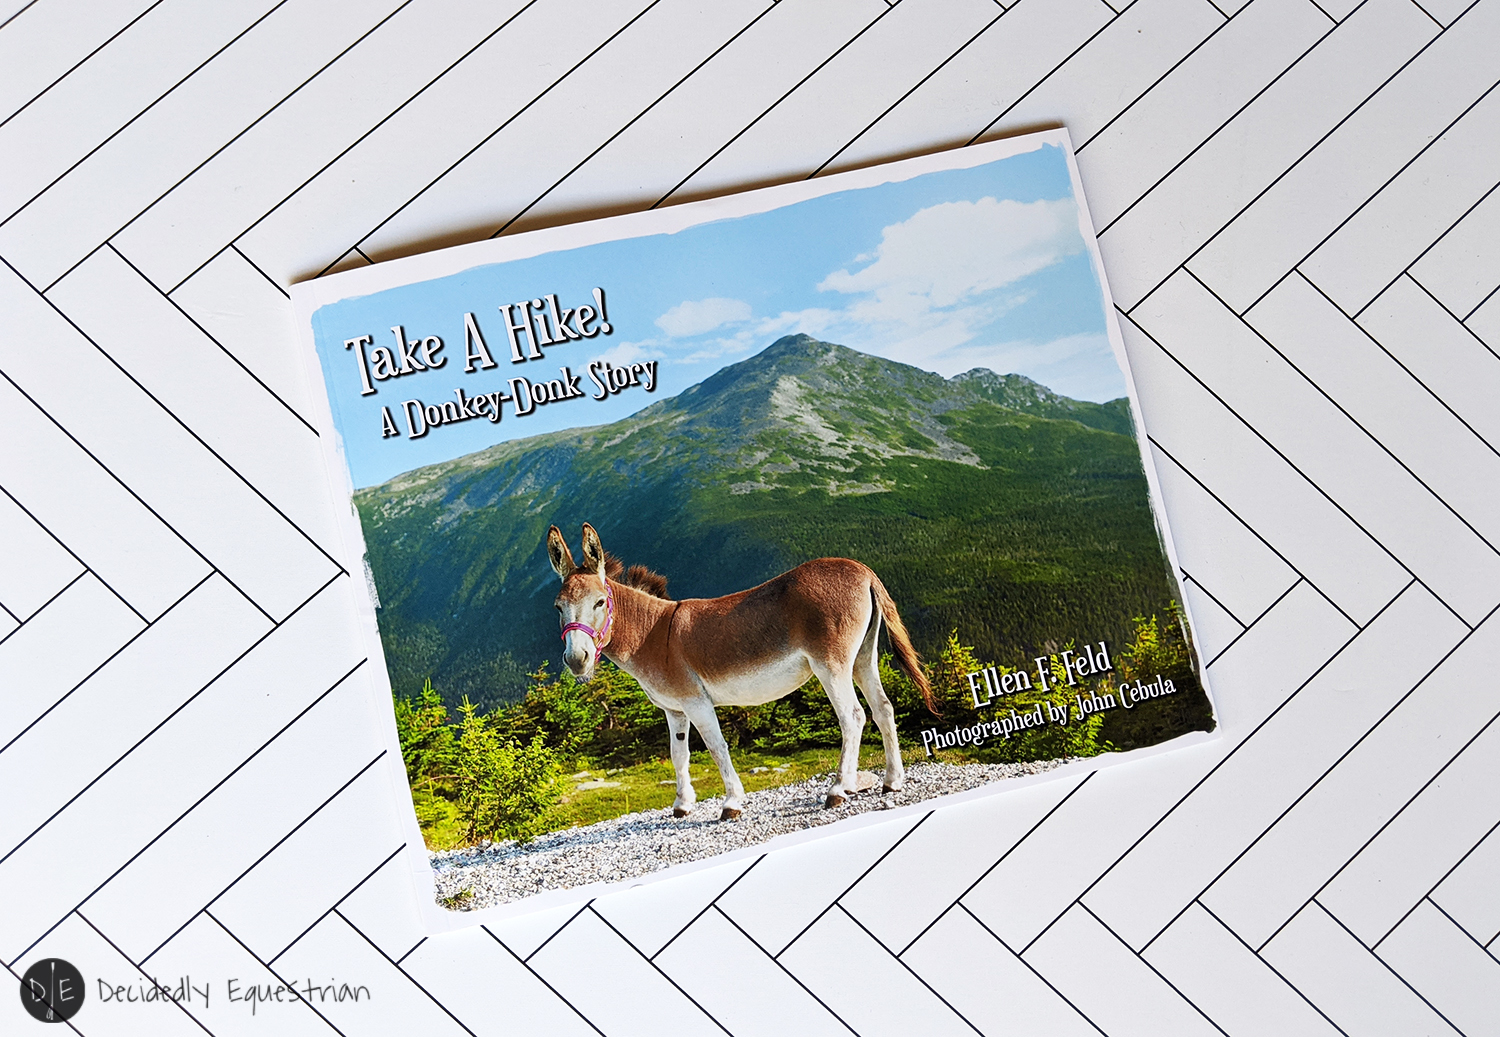 Take A Hike! A Donkey-Donk Story by Ellen F. Feld Book Review